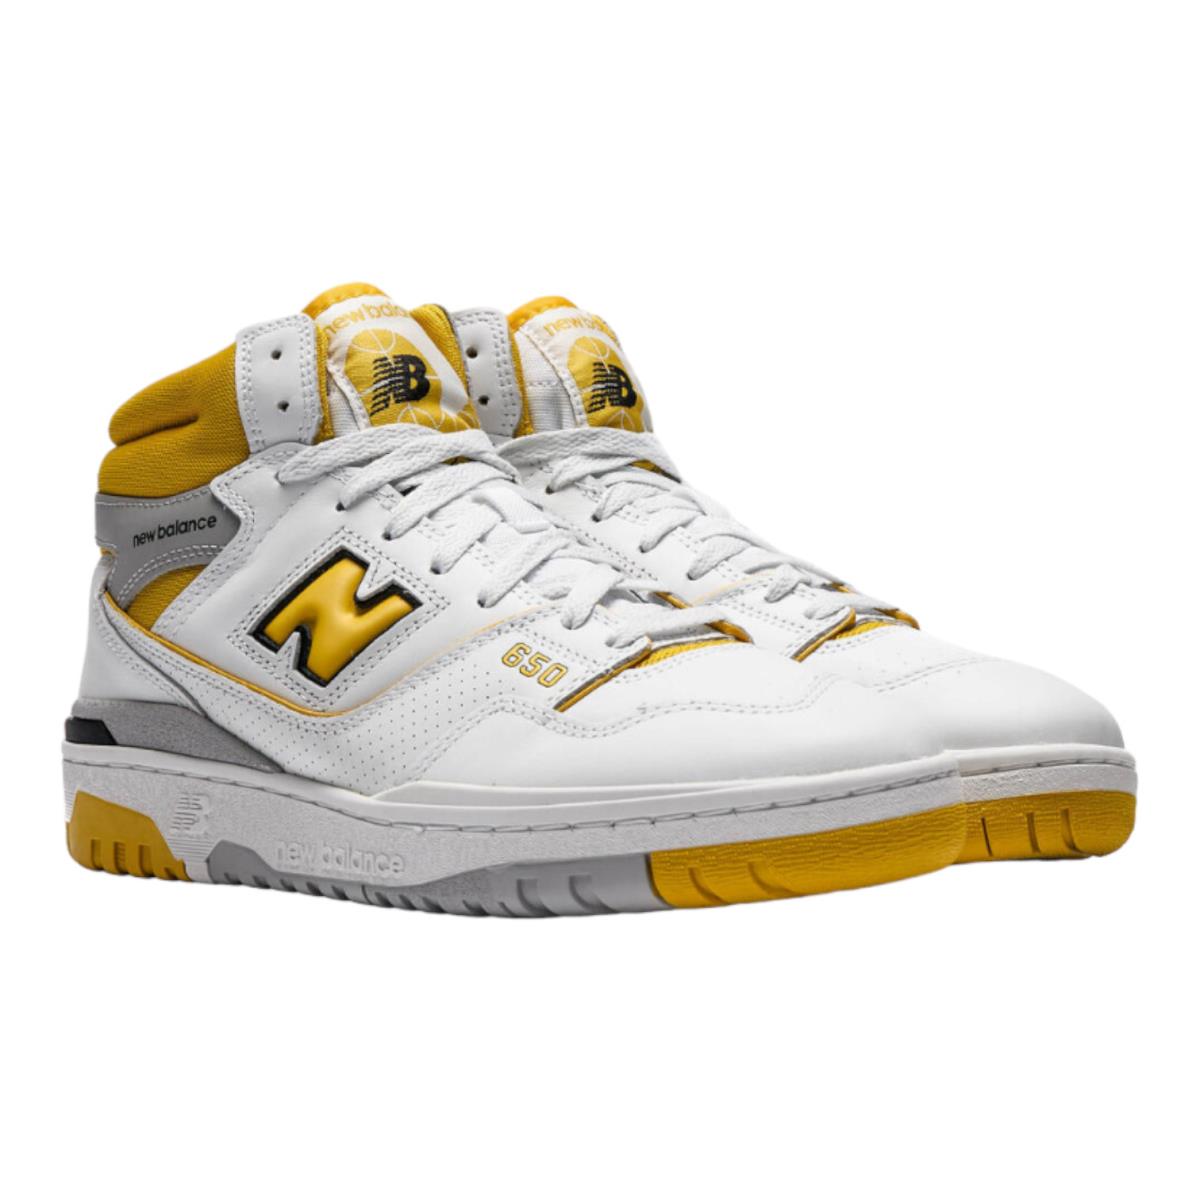 New Balance High Top Sneakers Shoes BB650RCG White Honeycomb Yellow Men`s 11